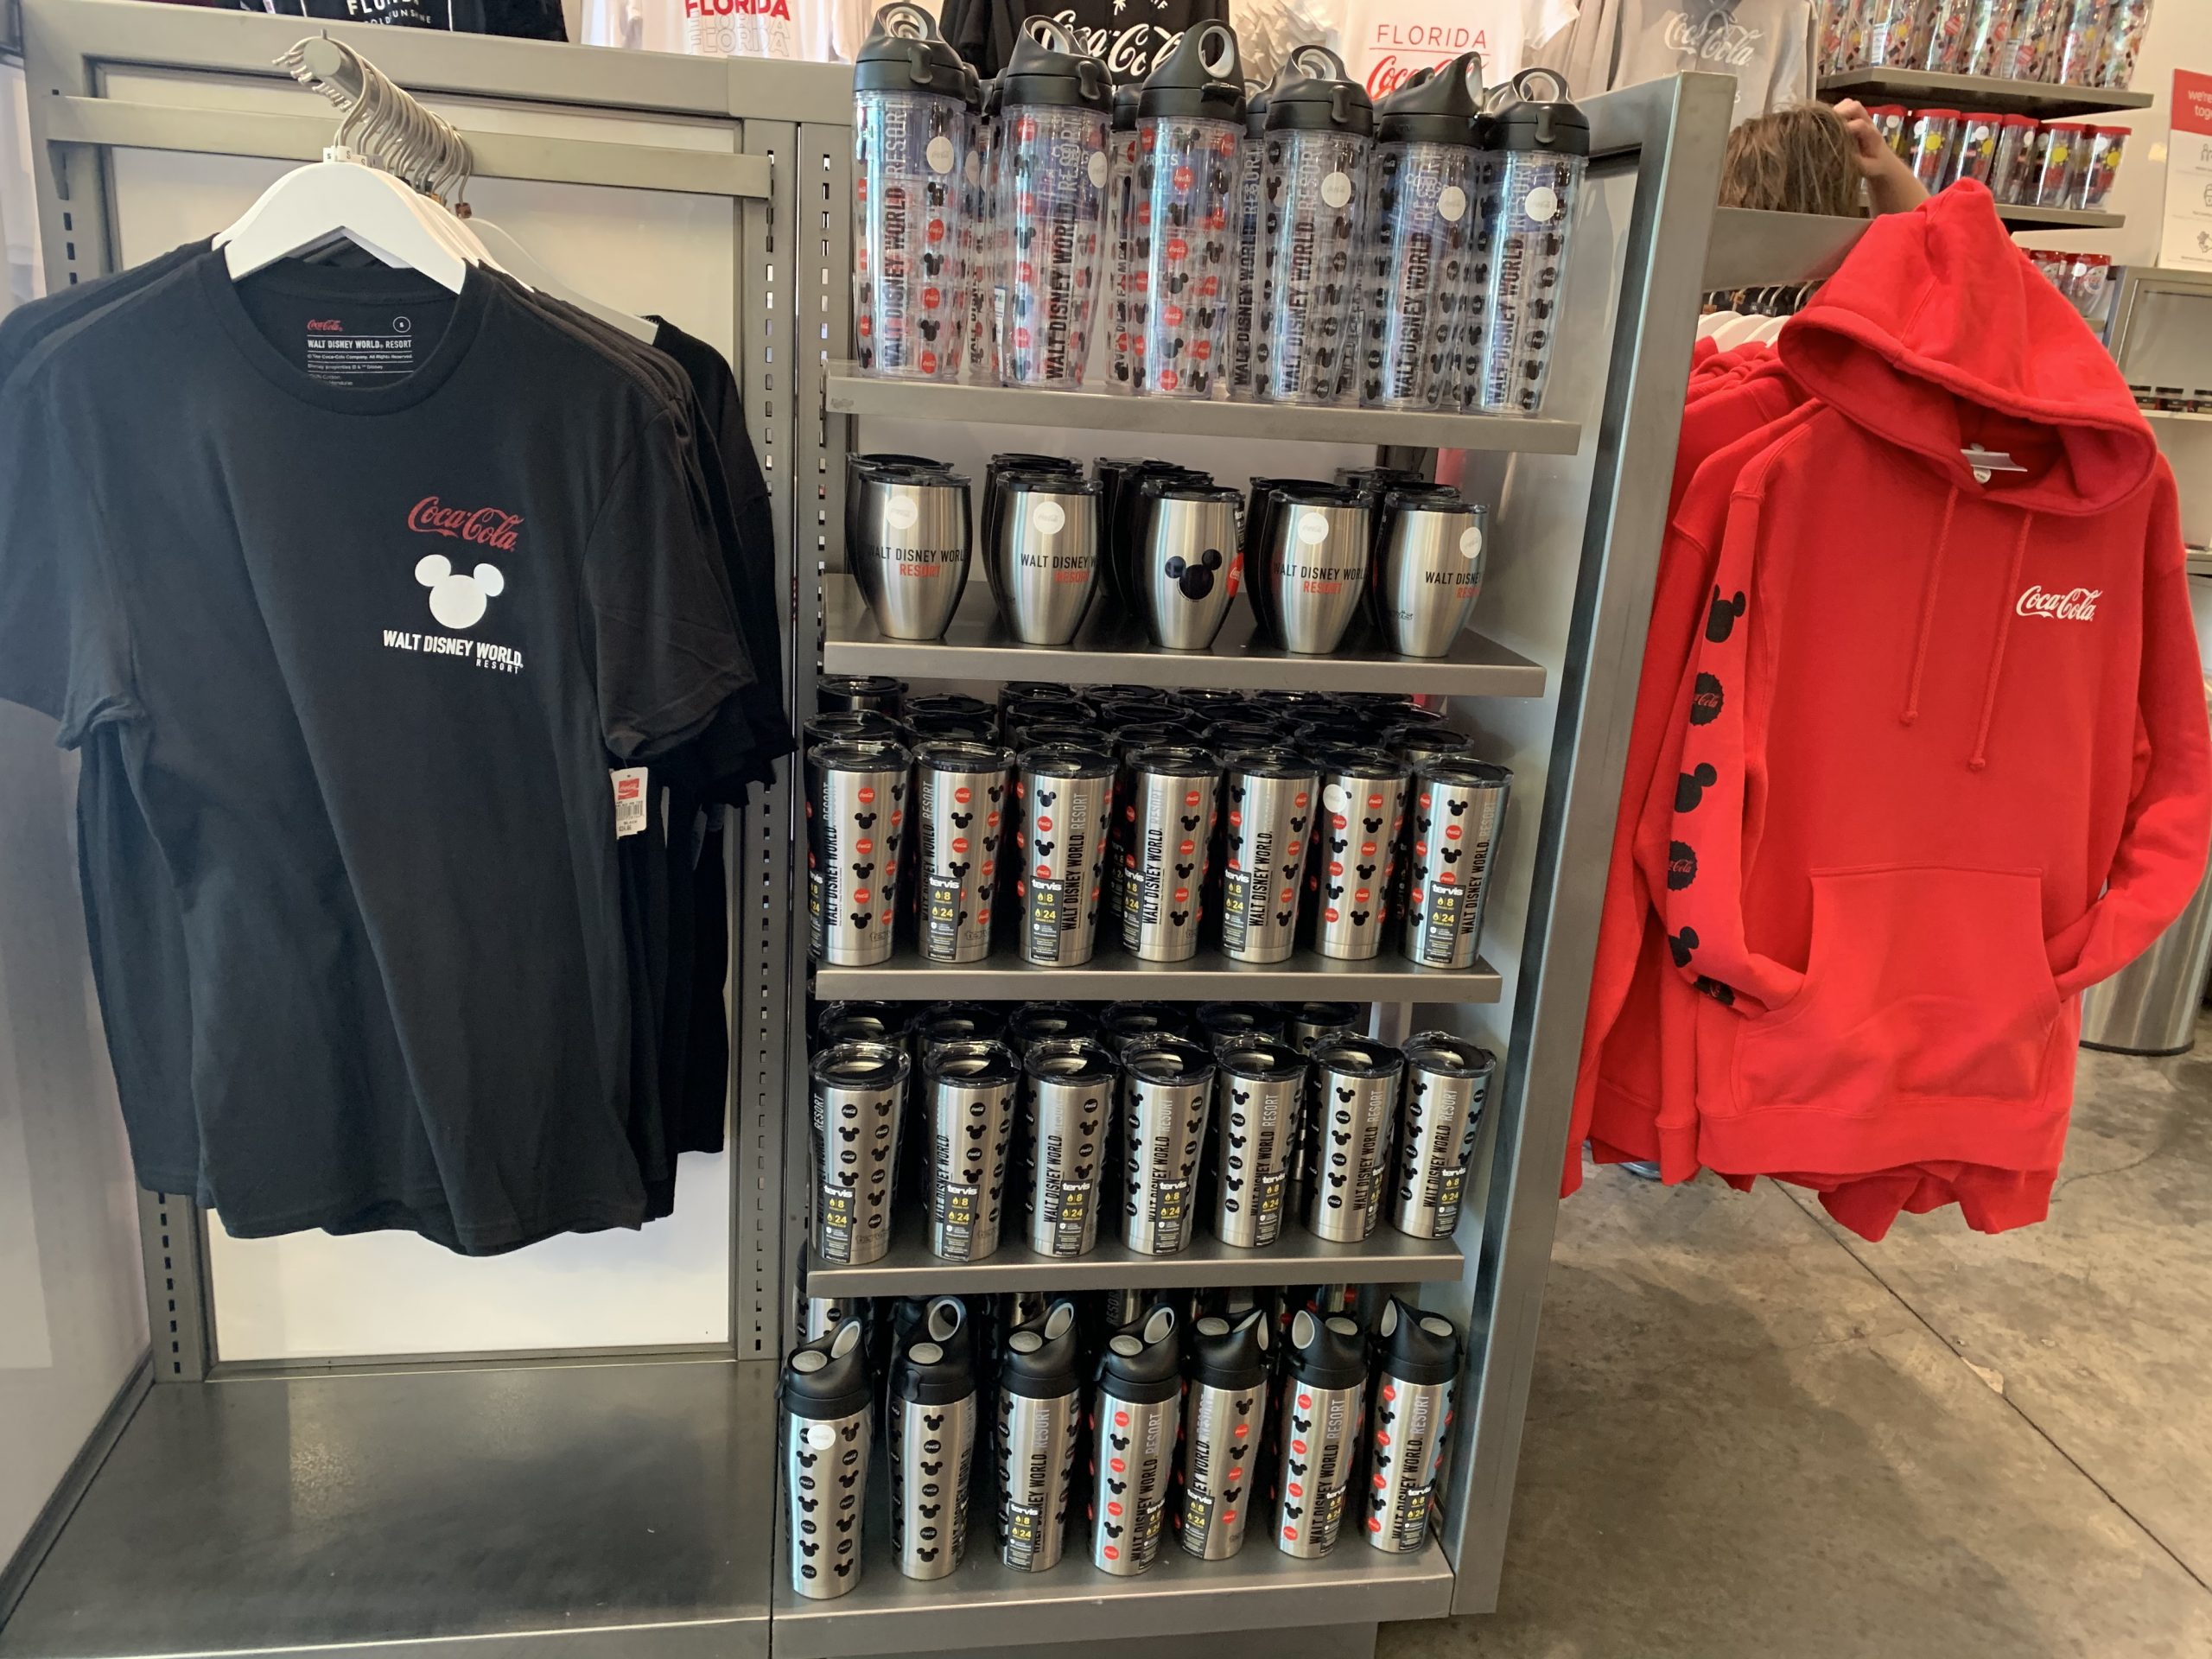 New Coca-Cola Themed Walt Disney World Tumblers Spotted at Disney Springs